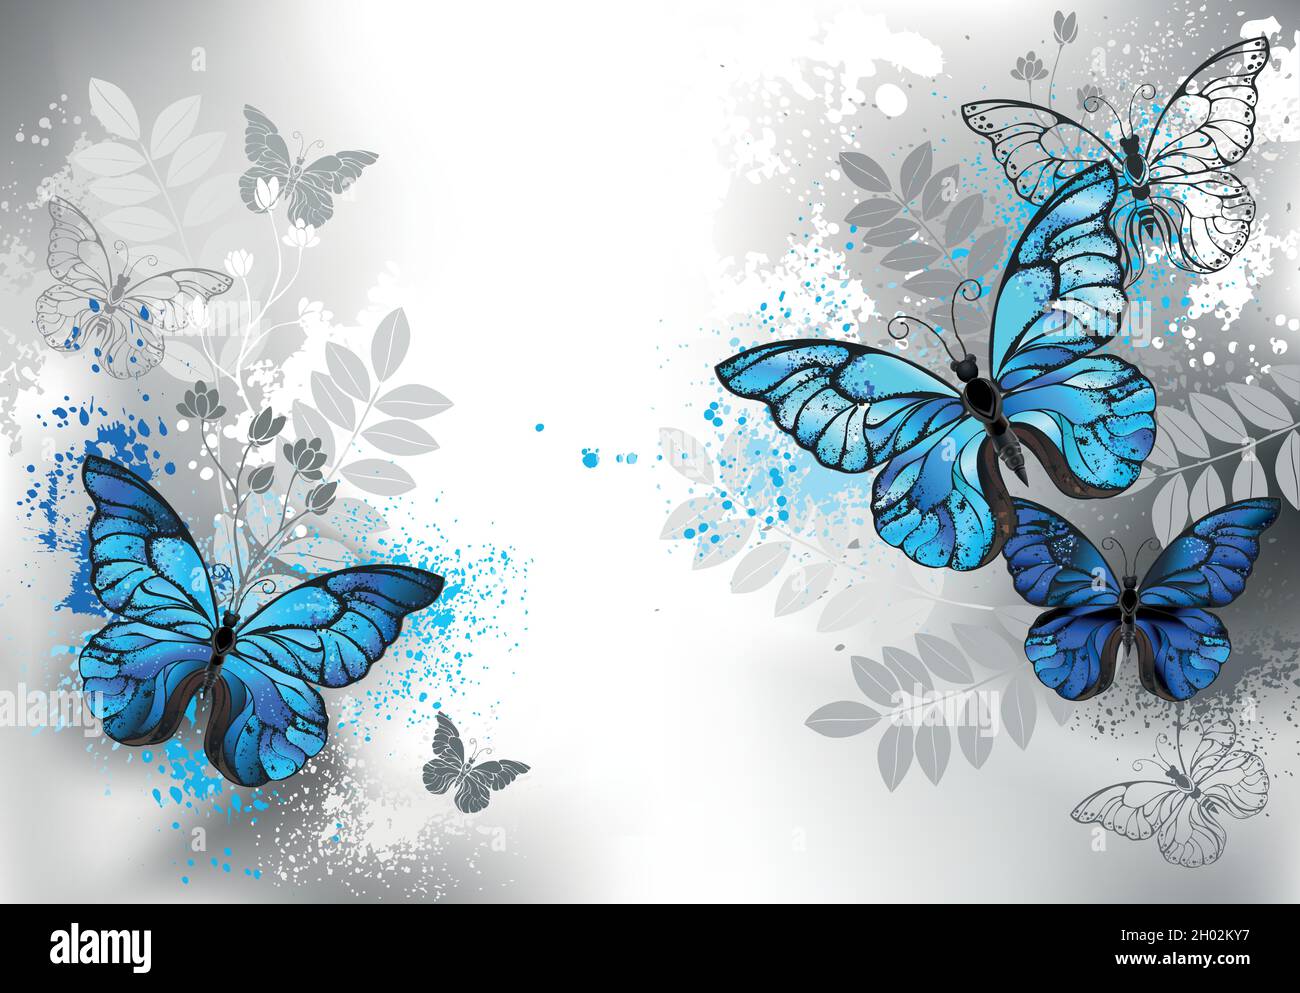 Composition of detailed blue morpho butterflies, decorated with blue paint drops with silhouette wild plants on gray background. Stock Vector